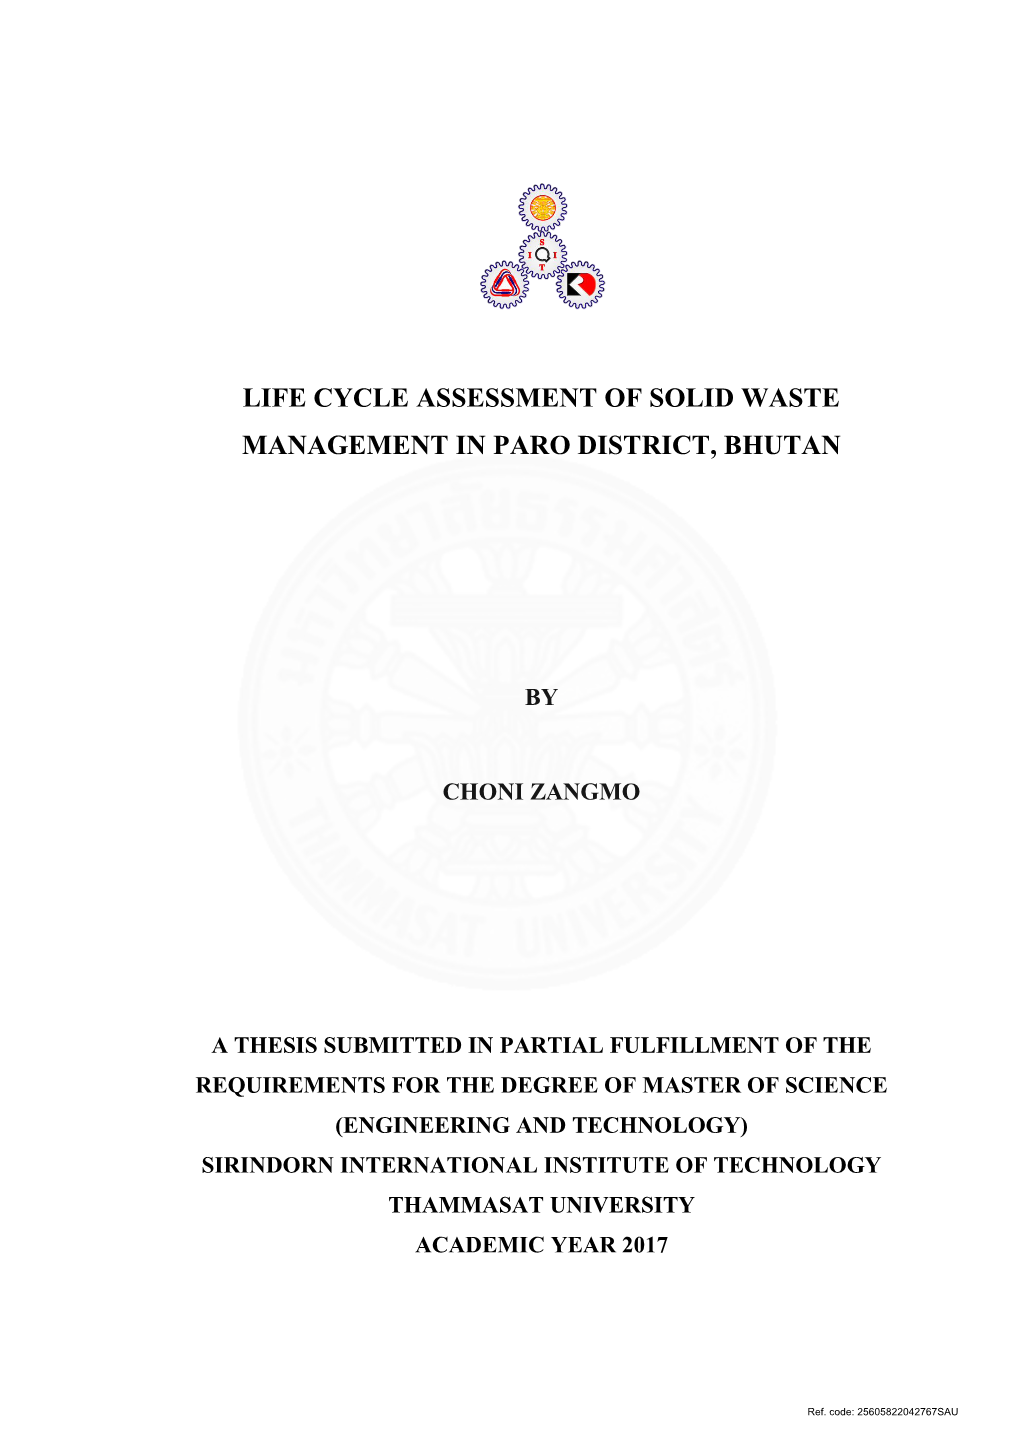 Life Cycle Assessment of Solid Waste Management in Paro District, Bhutan